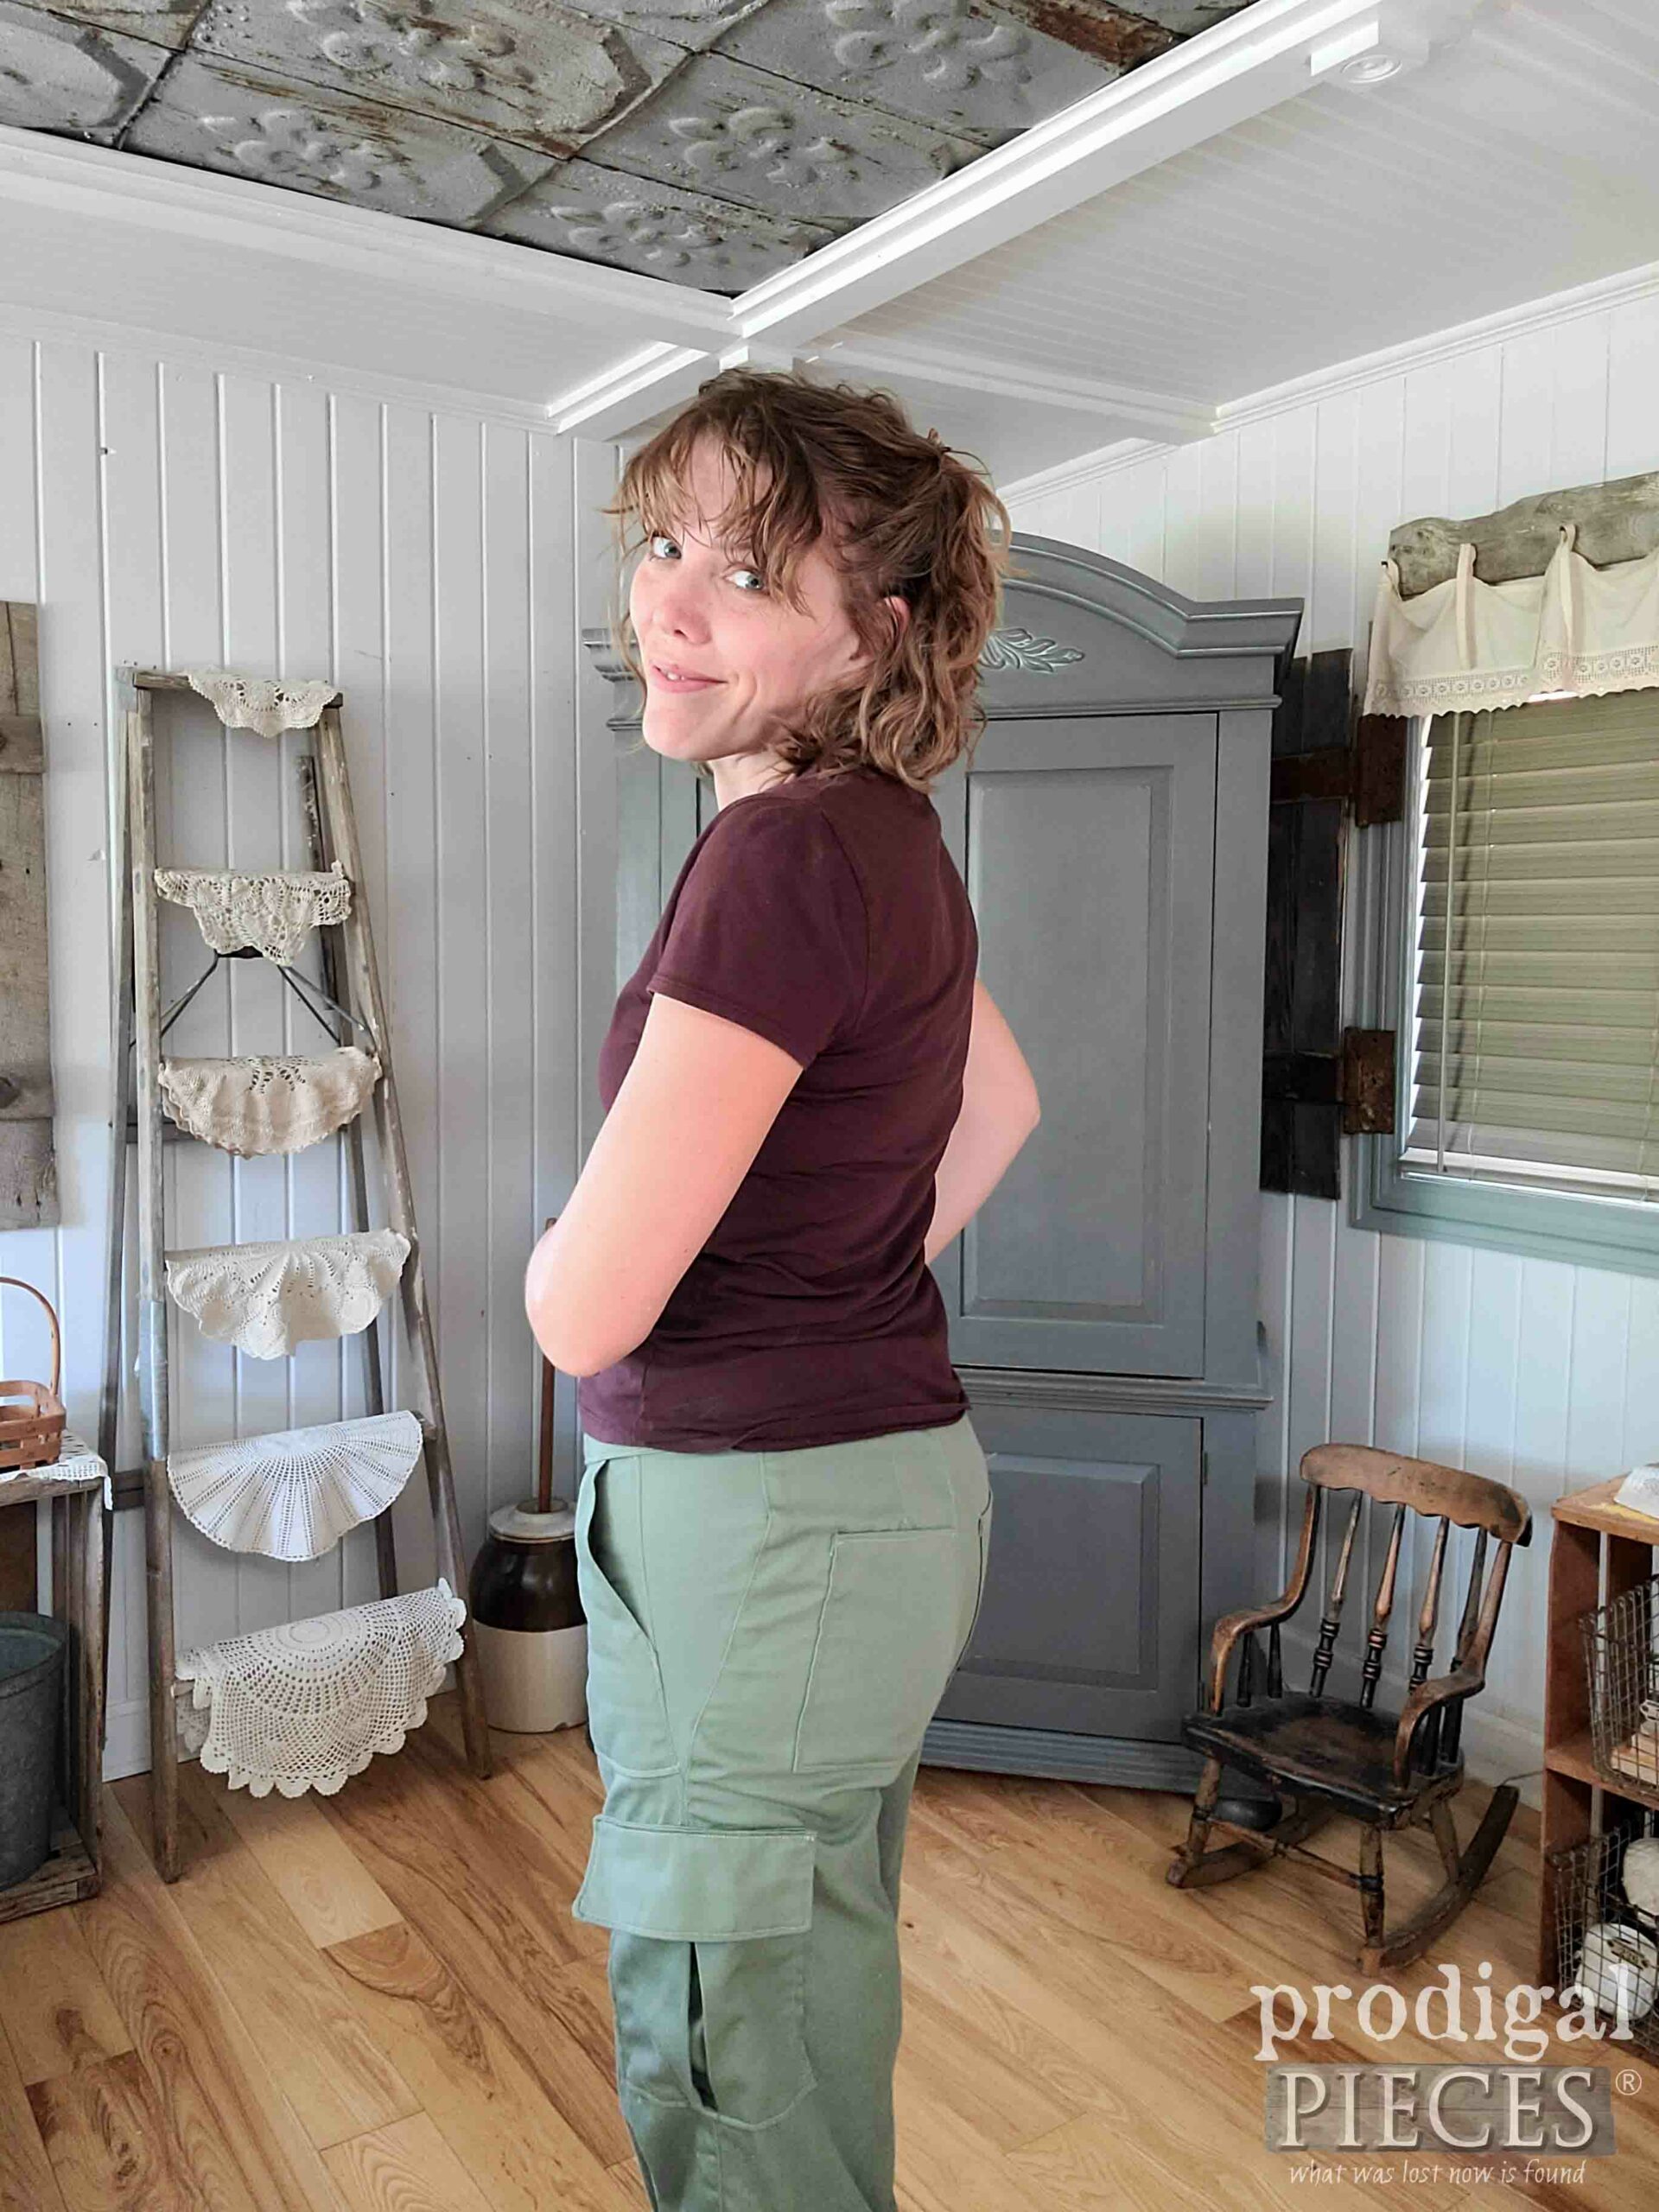 Larissa of Prodigal Pieces with her Refashioned Cargo Pants | prodigalpieces.com #prodigalpieces